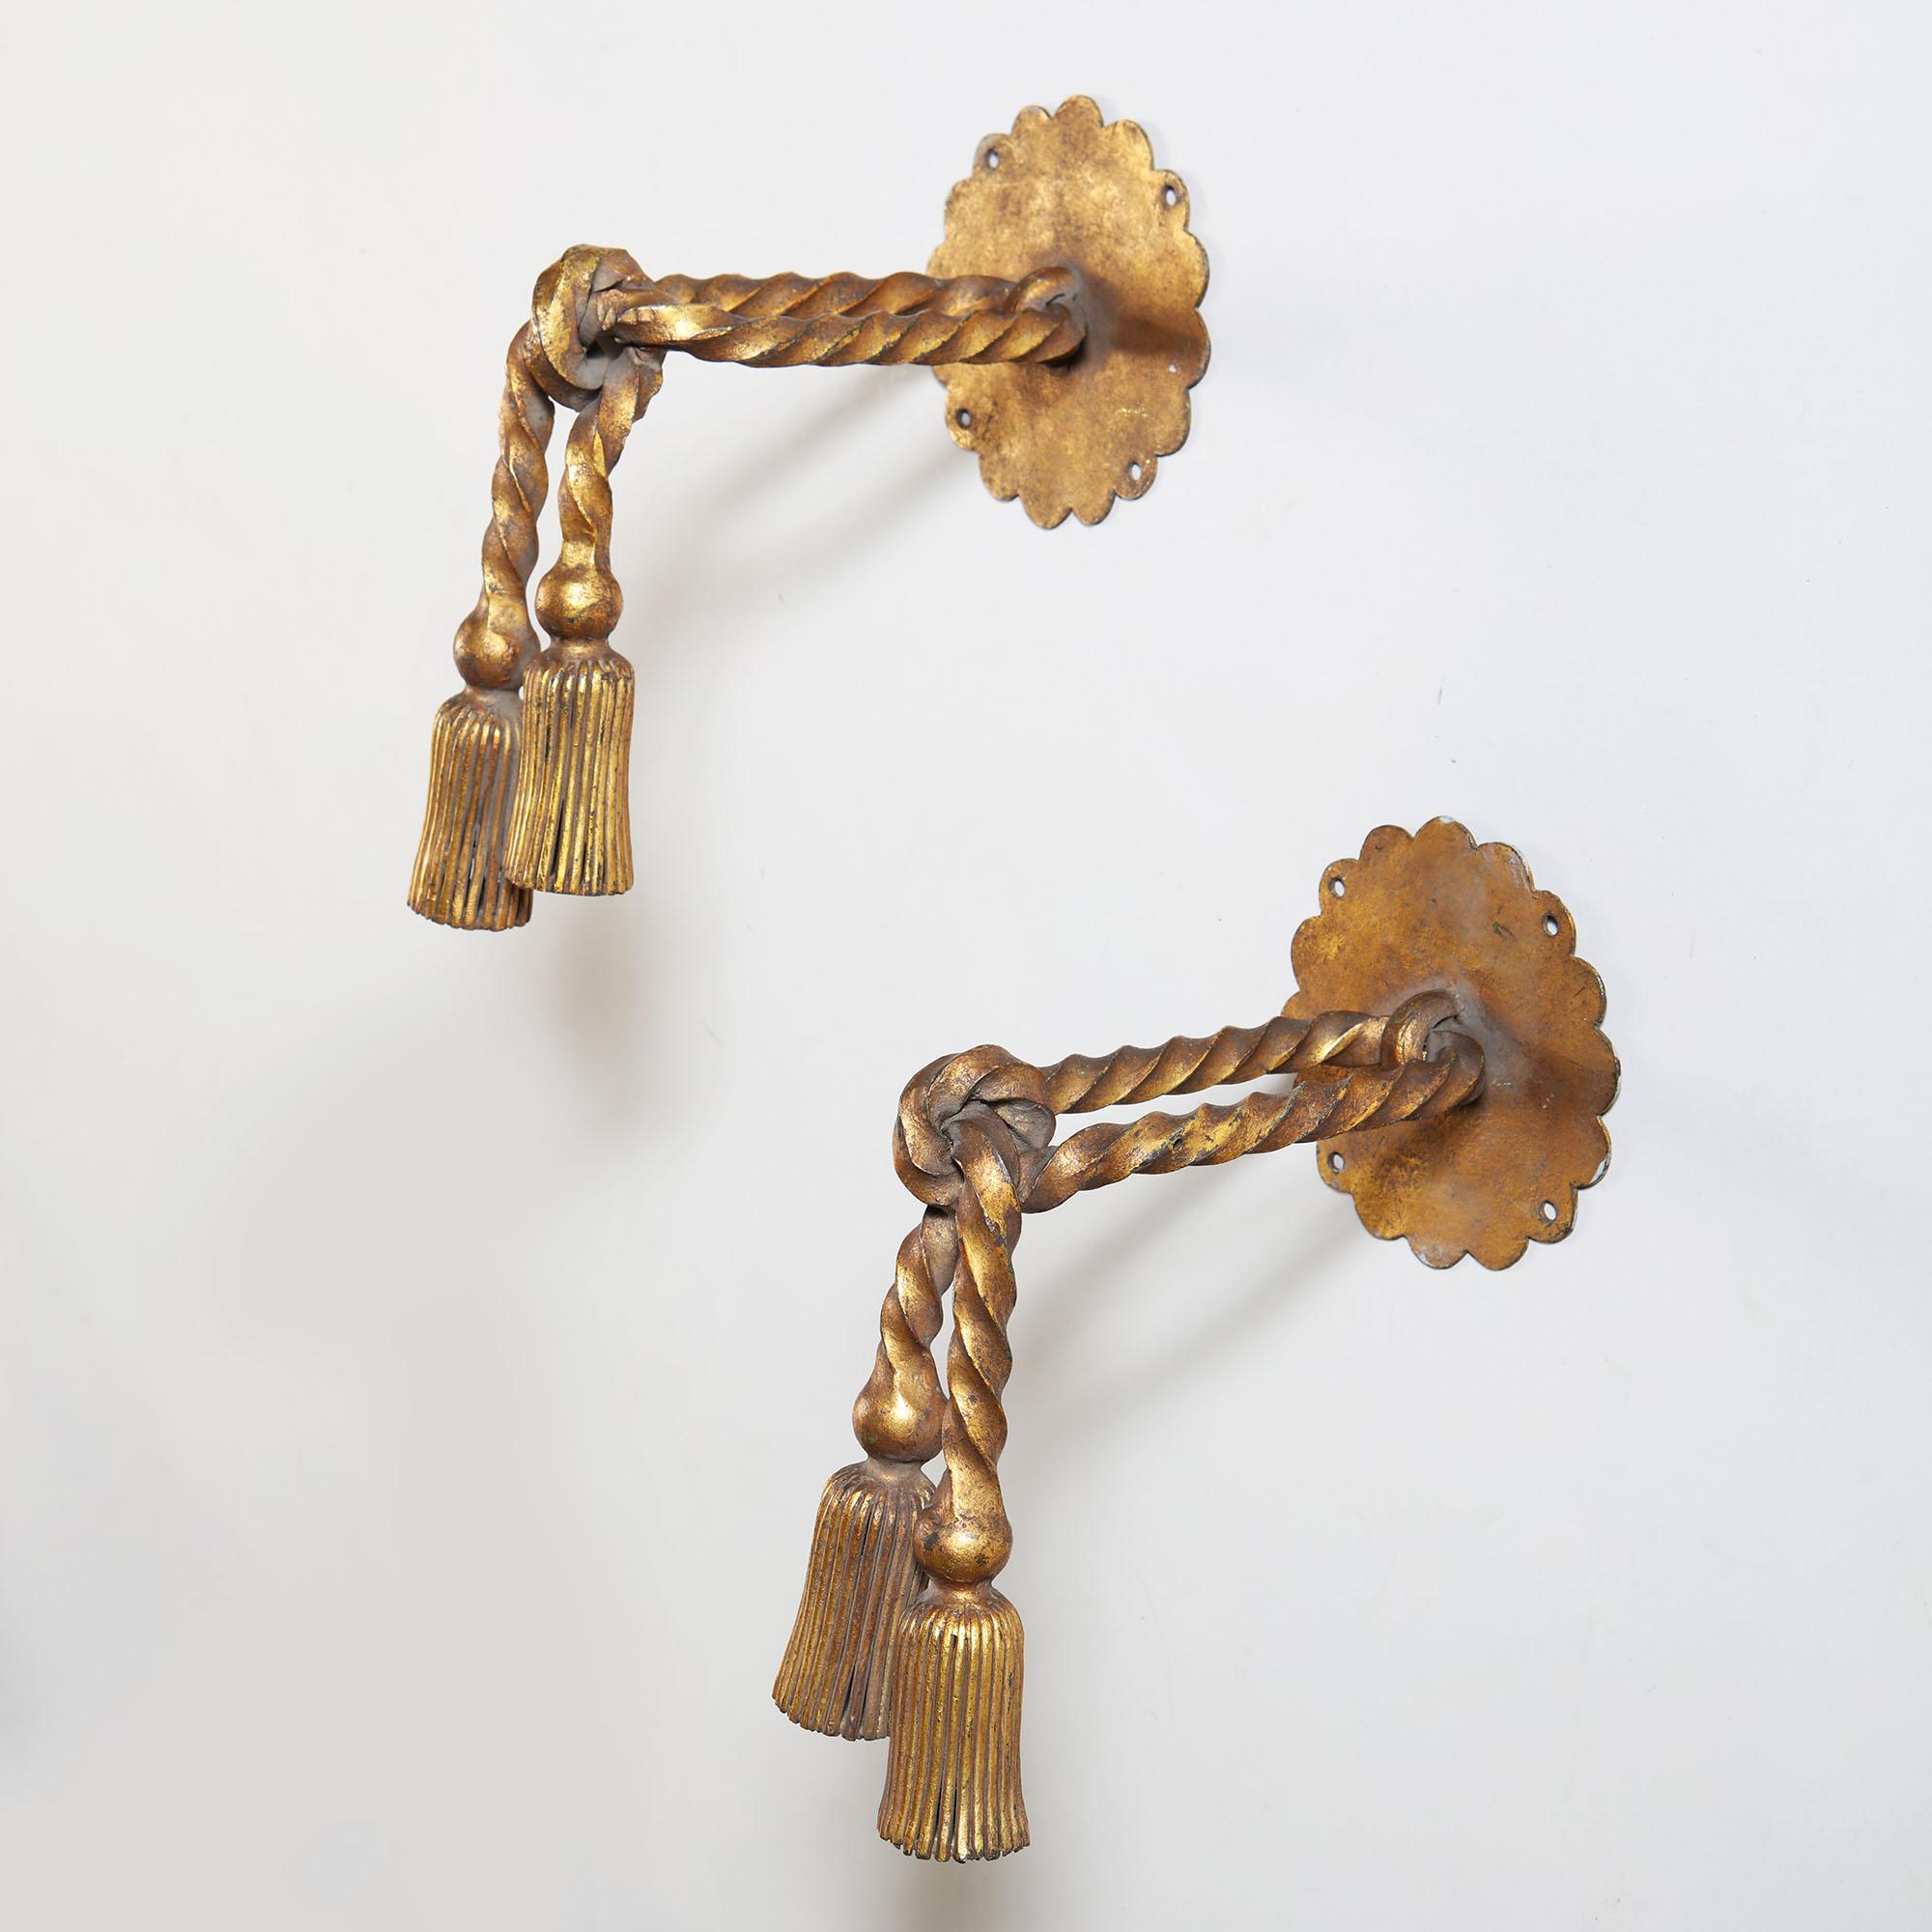 A fine pair of beaten bronze curtain tiebacks in the form of knotted twisted ropes with hanging tassels, attaching to the wall with a scalloped edge back plate. Attributed to Gilbert Poillerat (1902-1988).